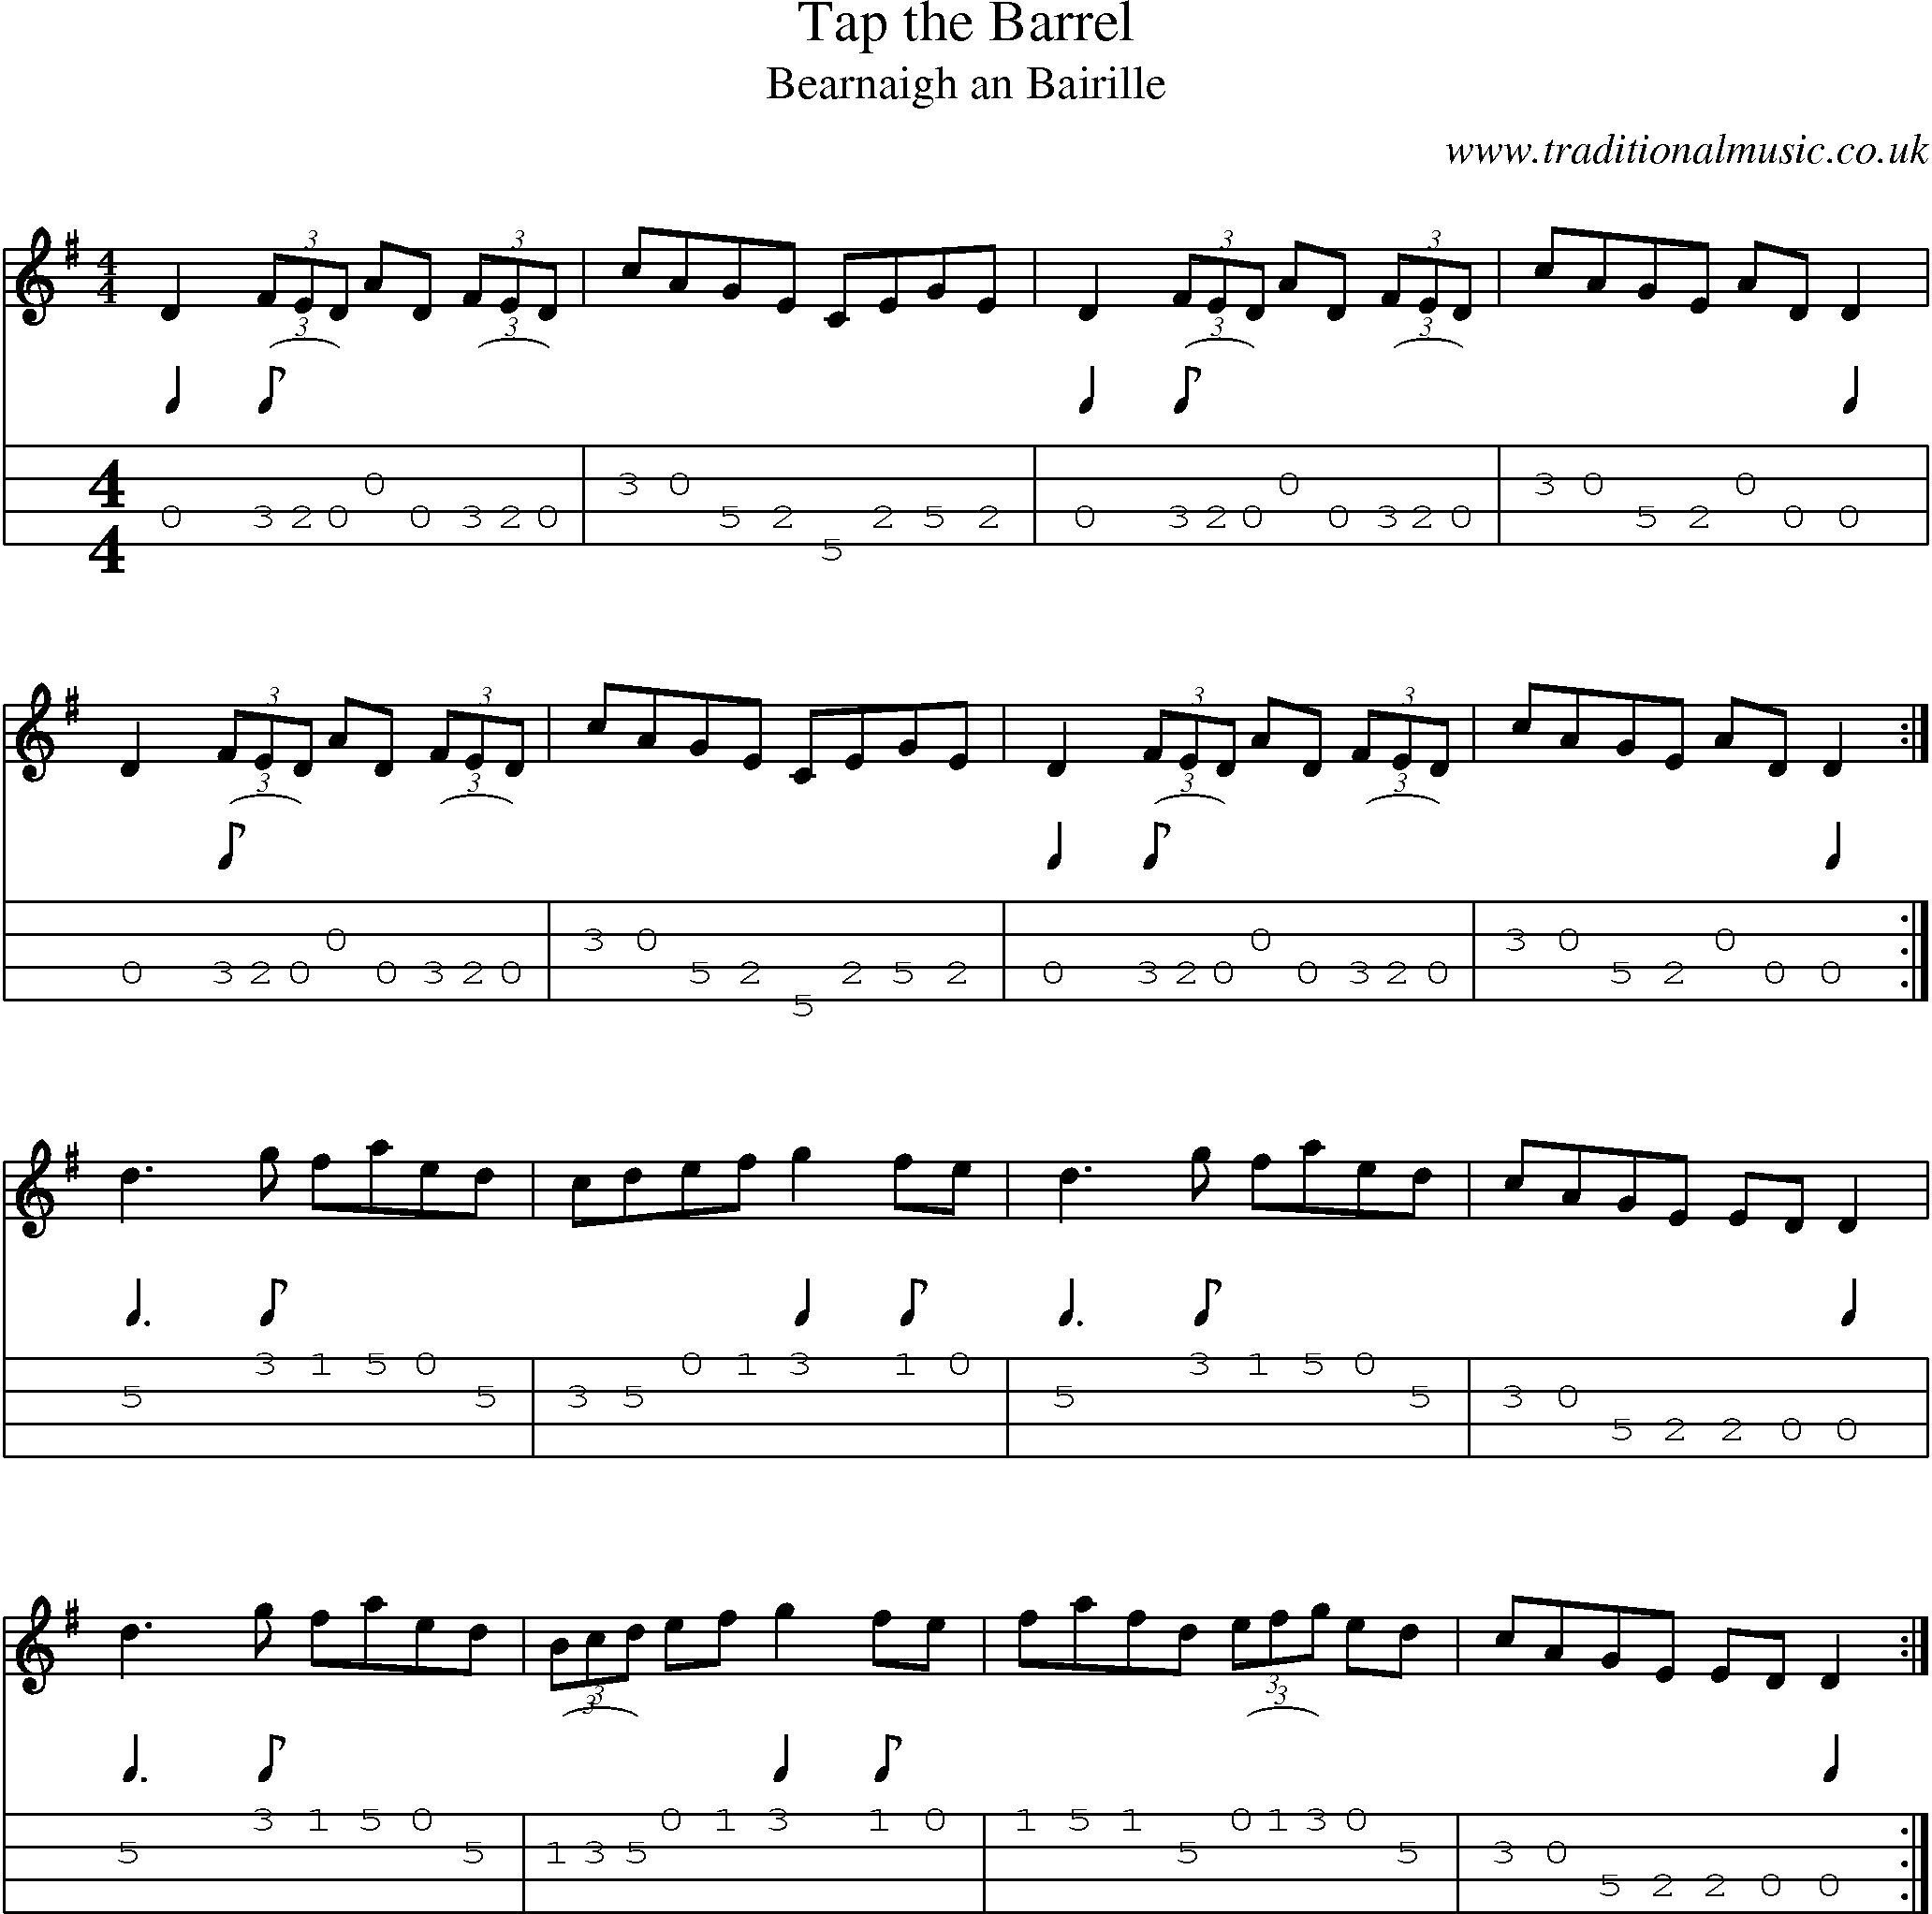 Music Score and Mandolin Tabs for Tap Barrel